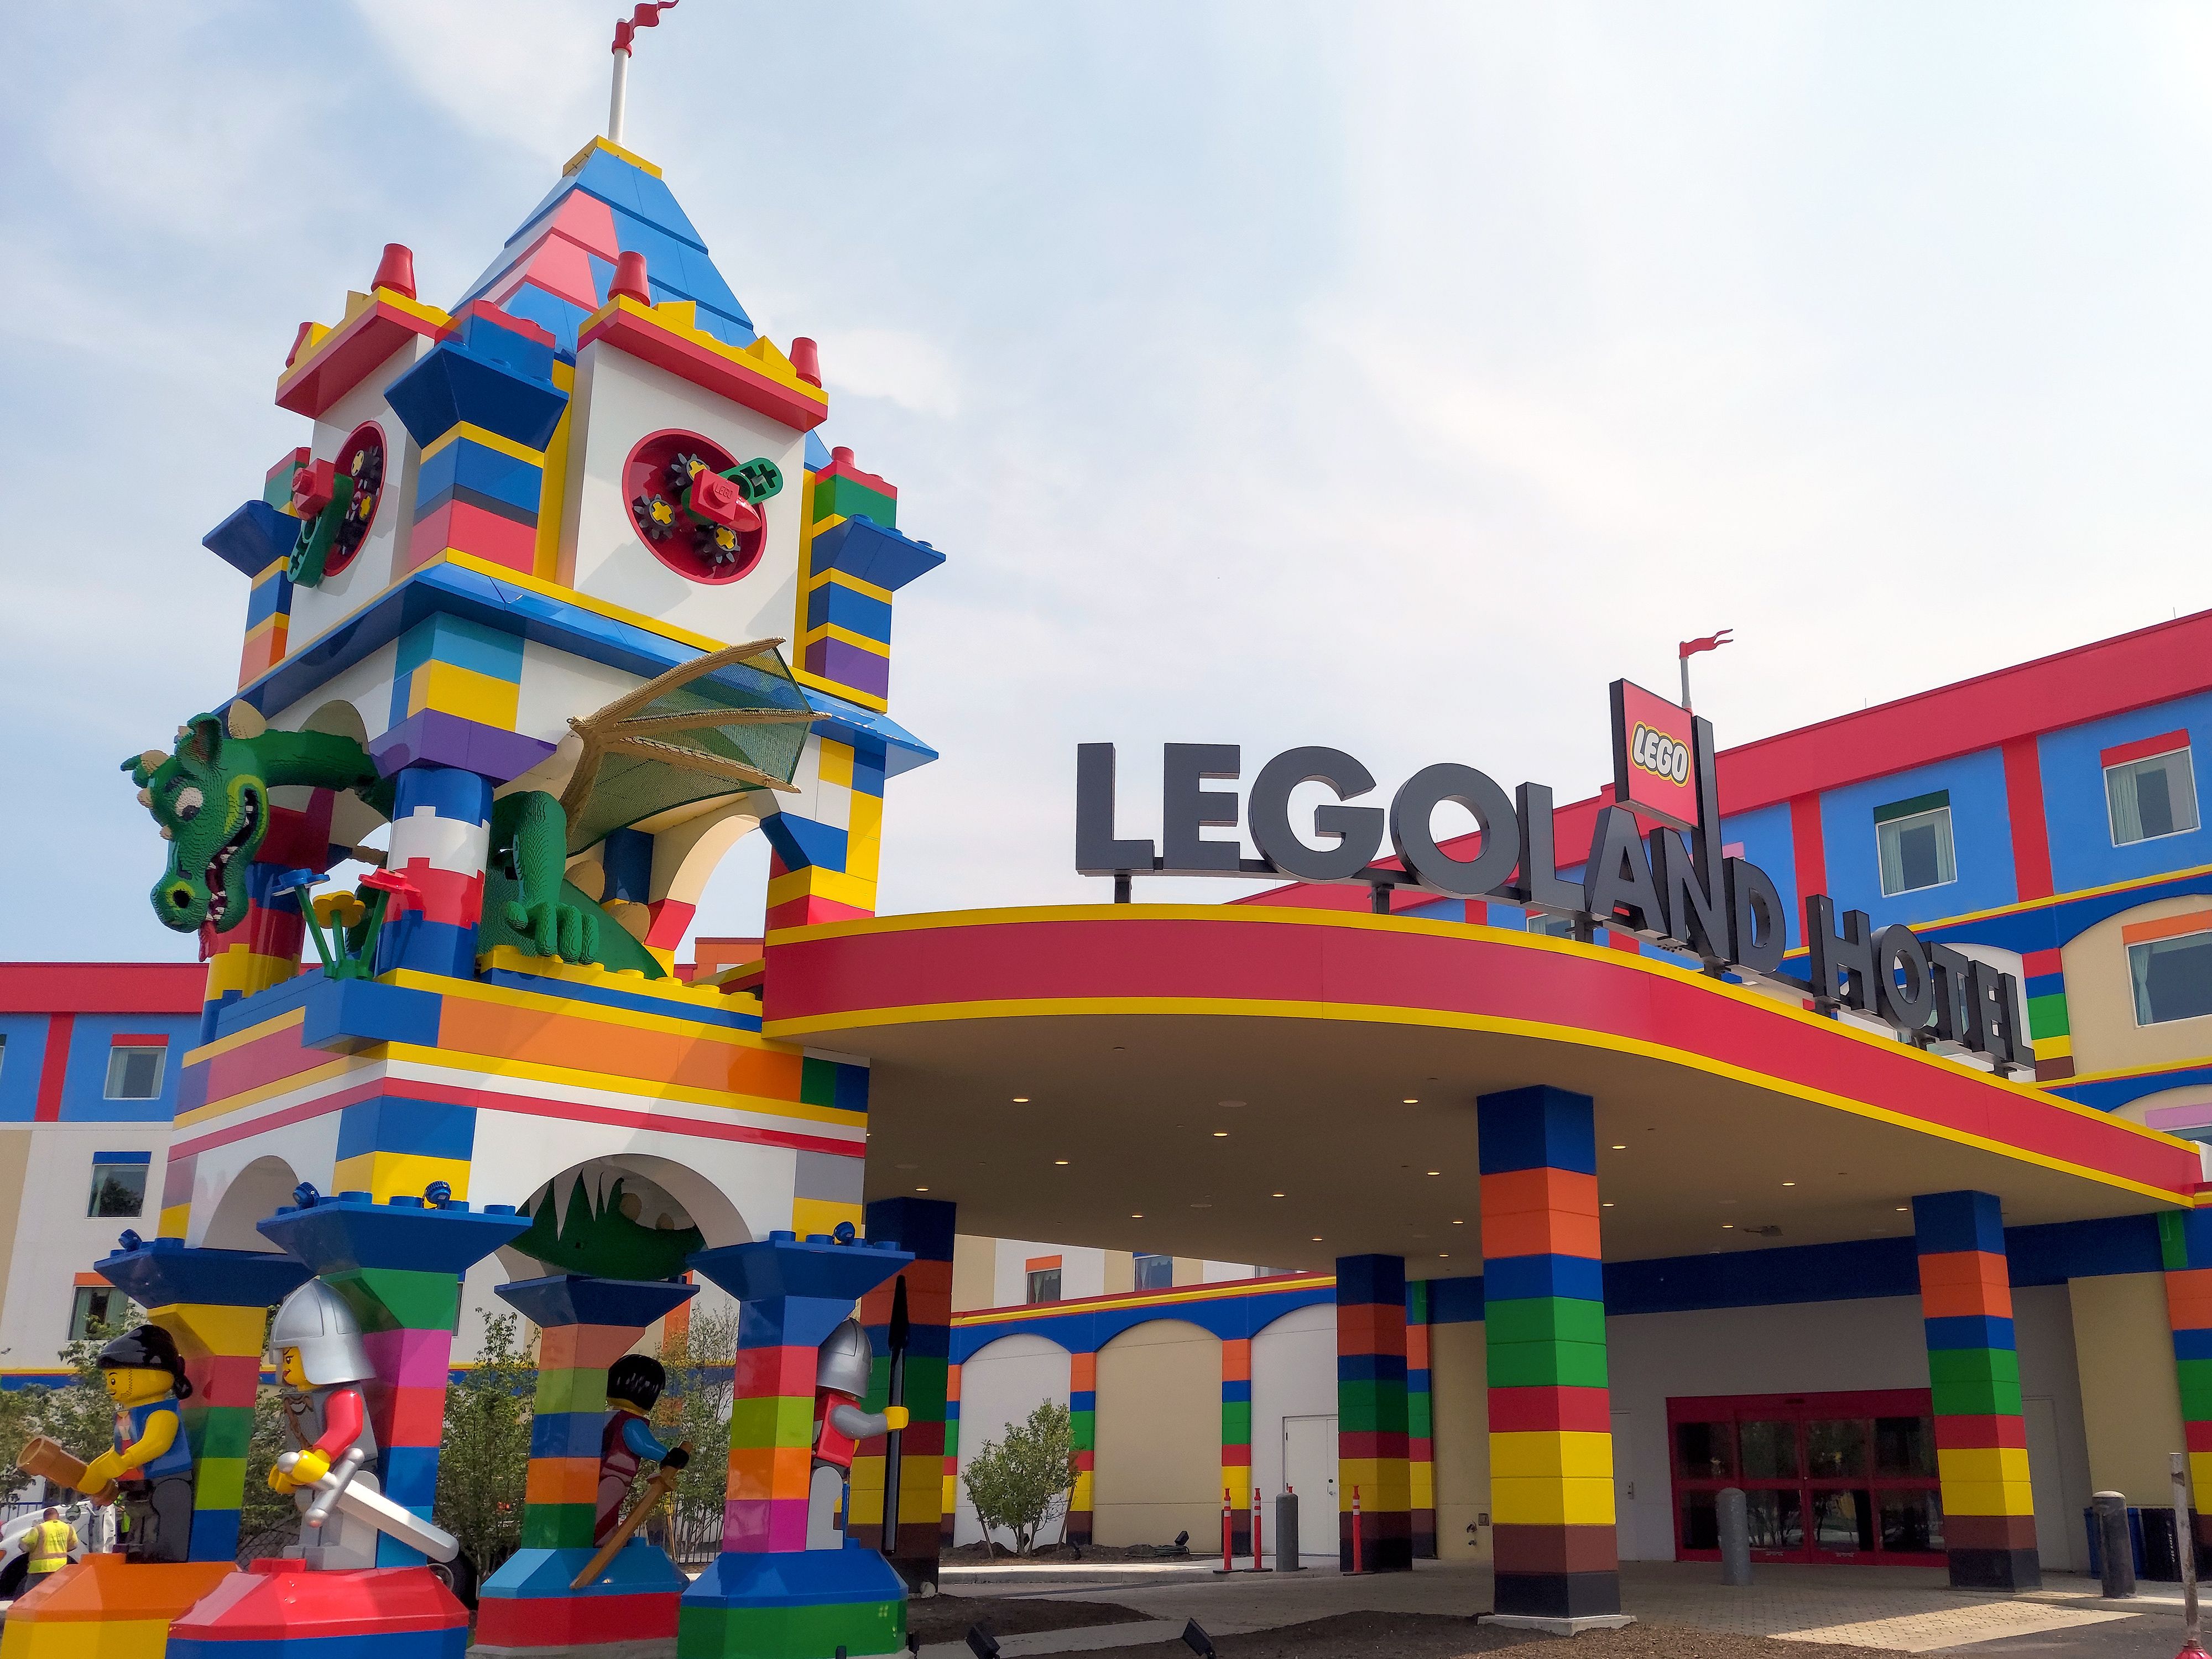 Legoland Hotel Review: What to Know Before You Go to Goshen, NY